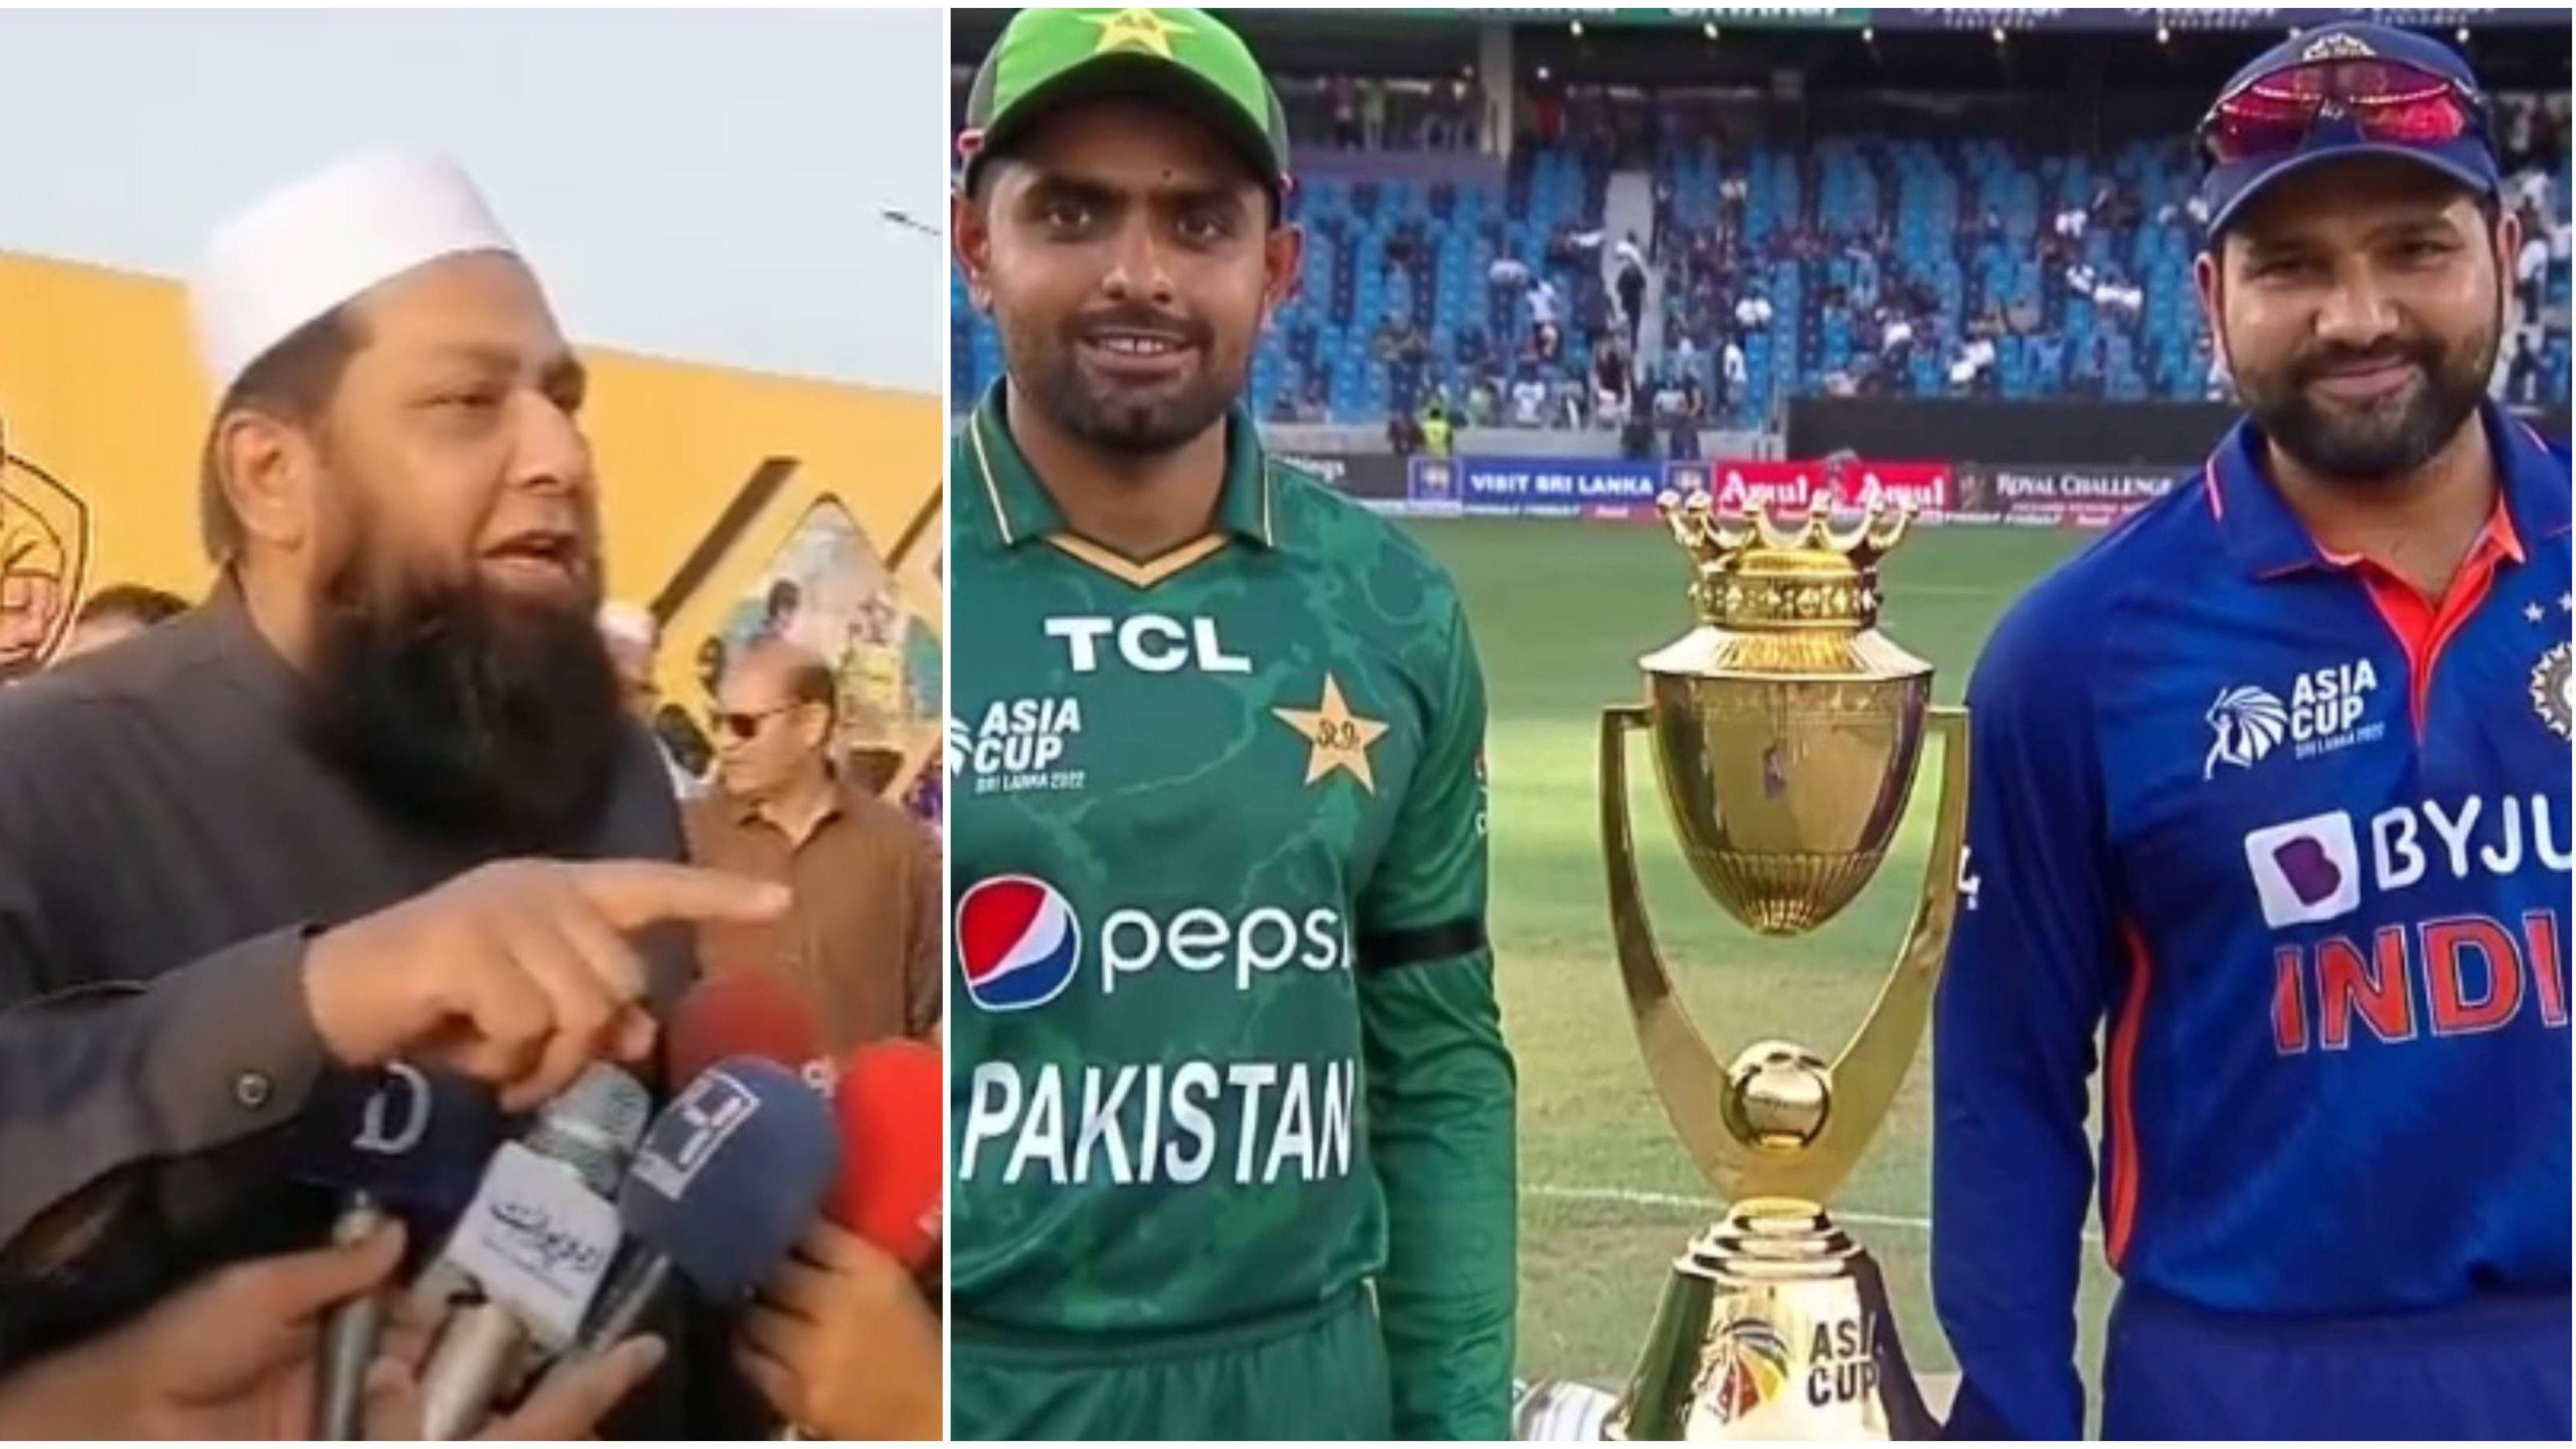 WATCH: “Humein bhi uske mulk mein nahi jaana chahiye,” Inzamam’s take on ongoing conflict over Asia Cup 2023